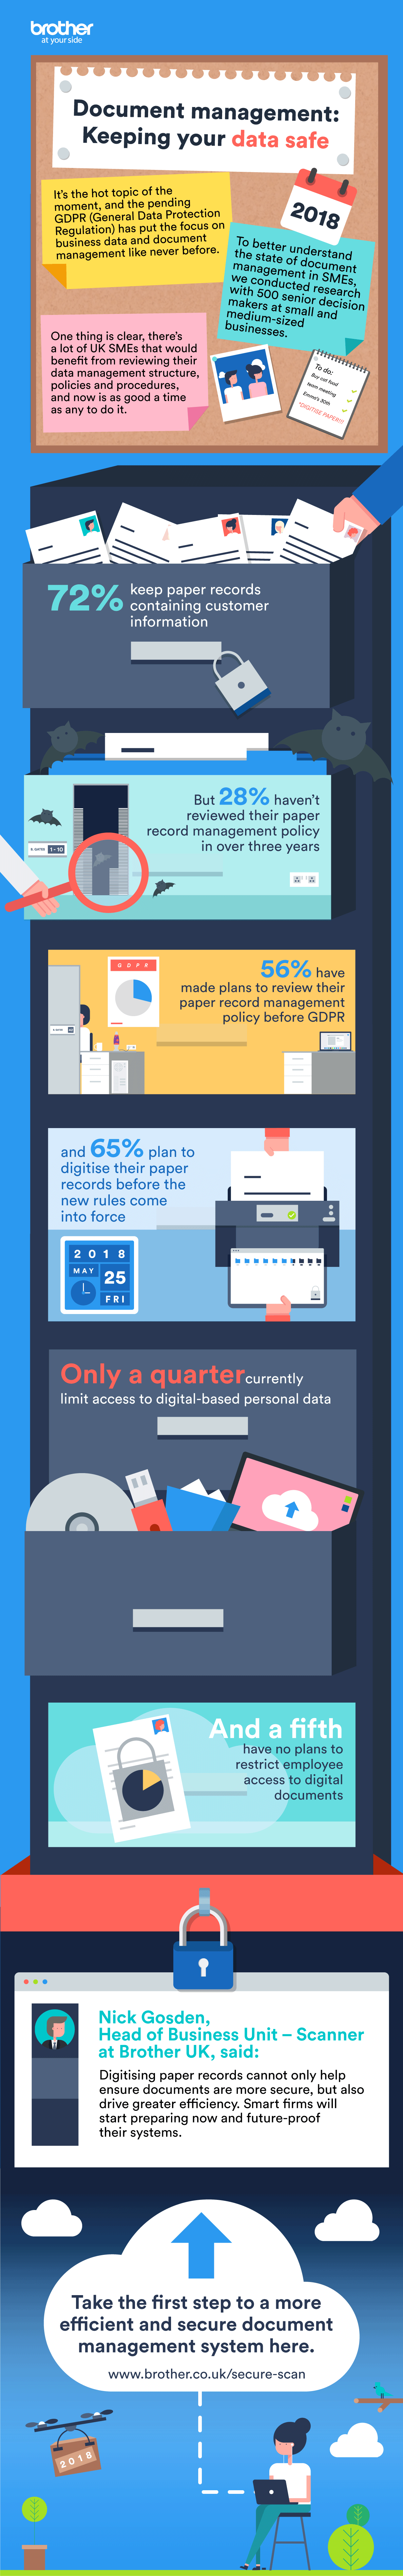 Brother data security processes infographic showcasing the part secure scanning can play in data security 